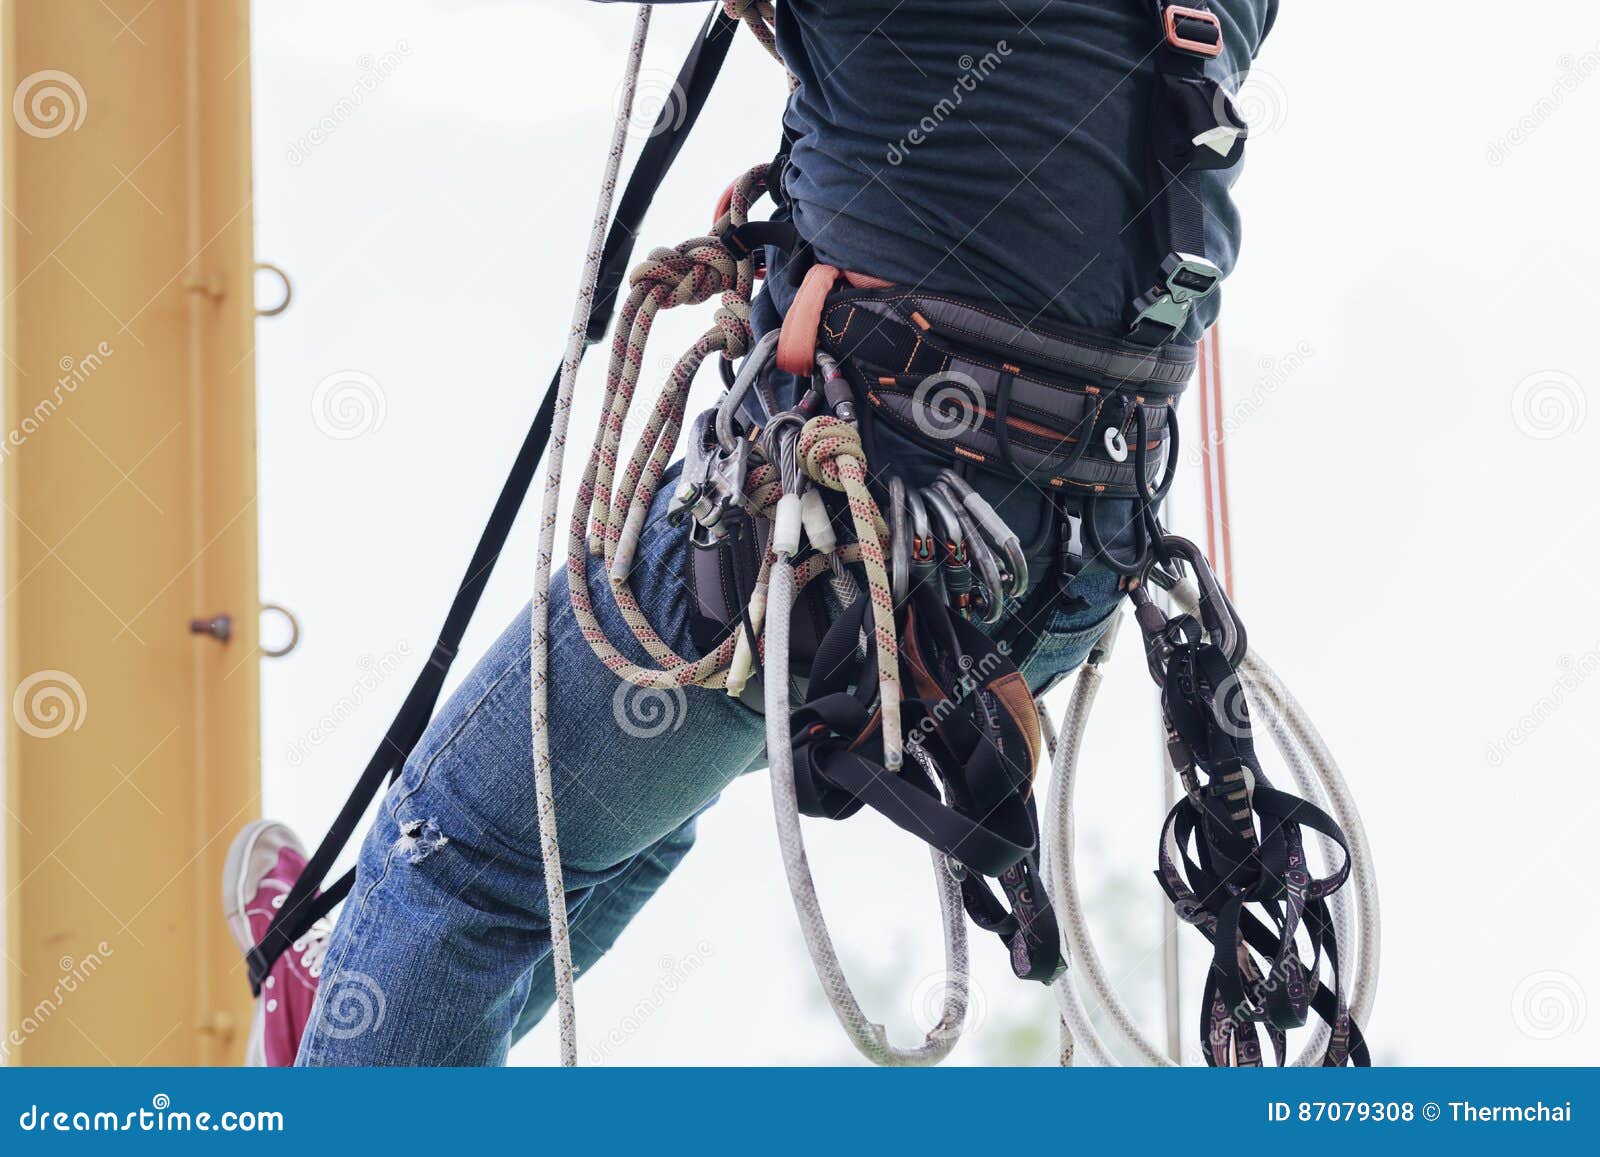 Rope access irata worker stock photo. Image of business - 87079308